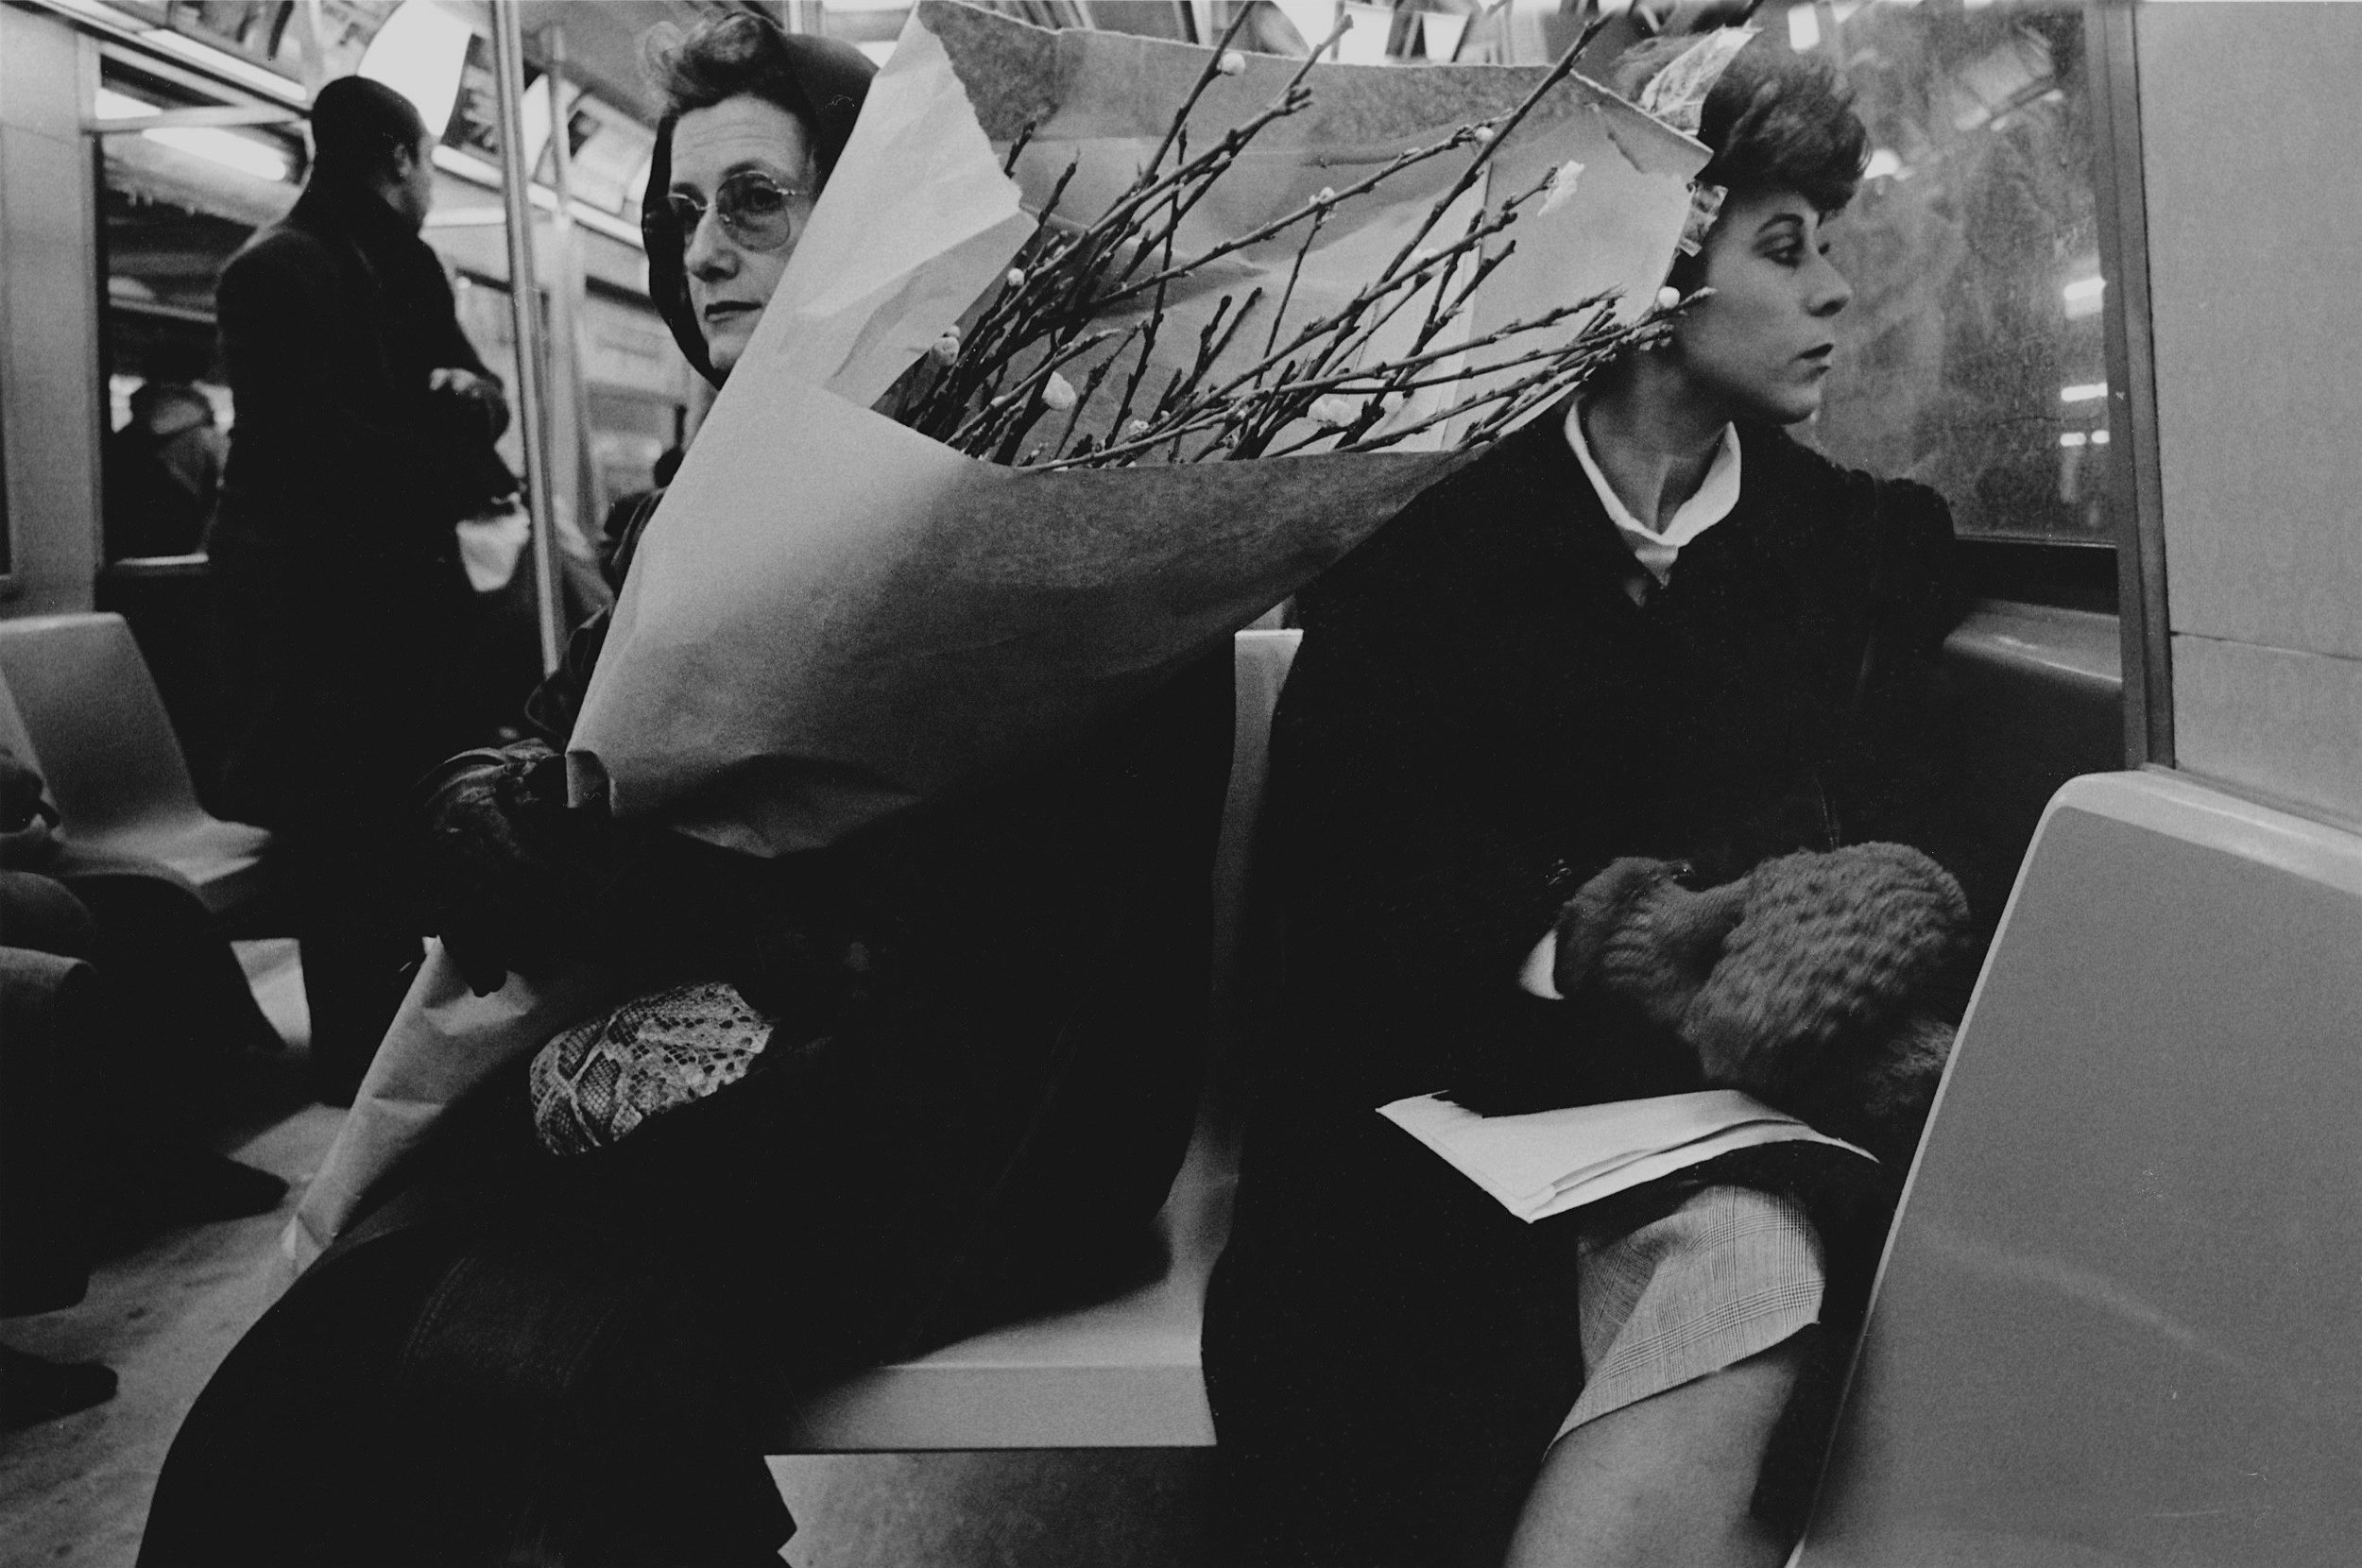 spring flowers on f train, nyc, c. 1981